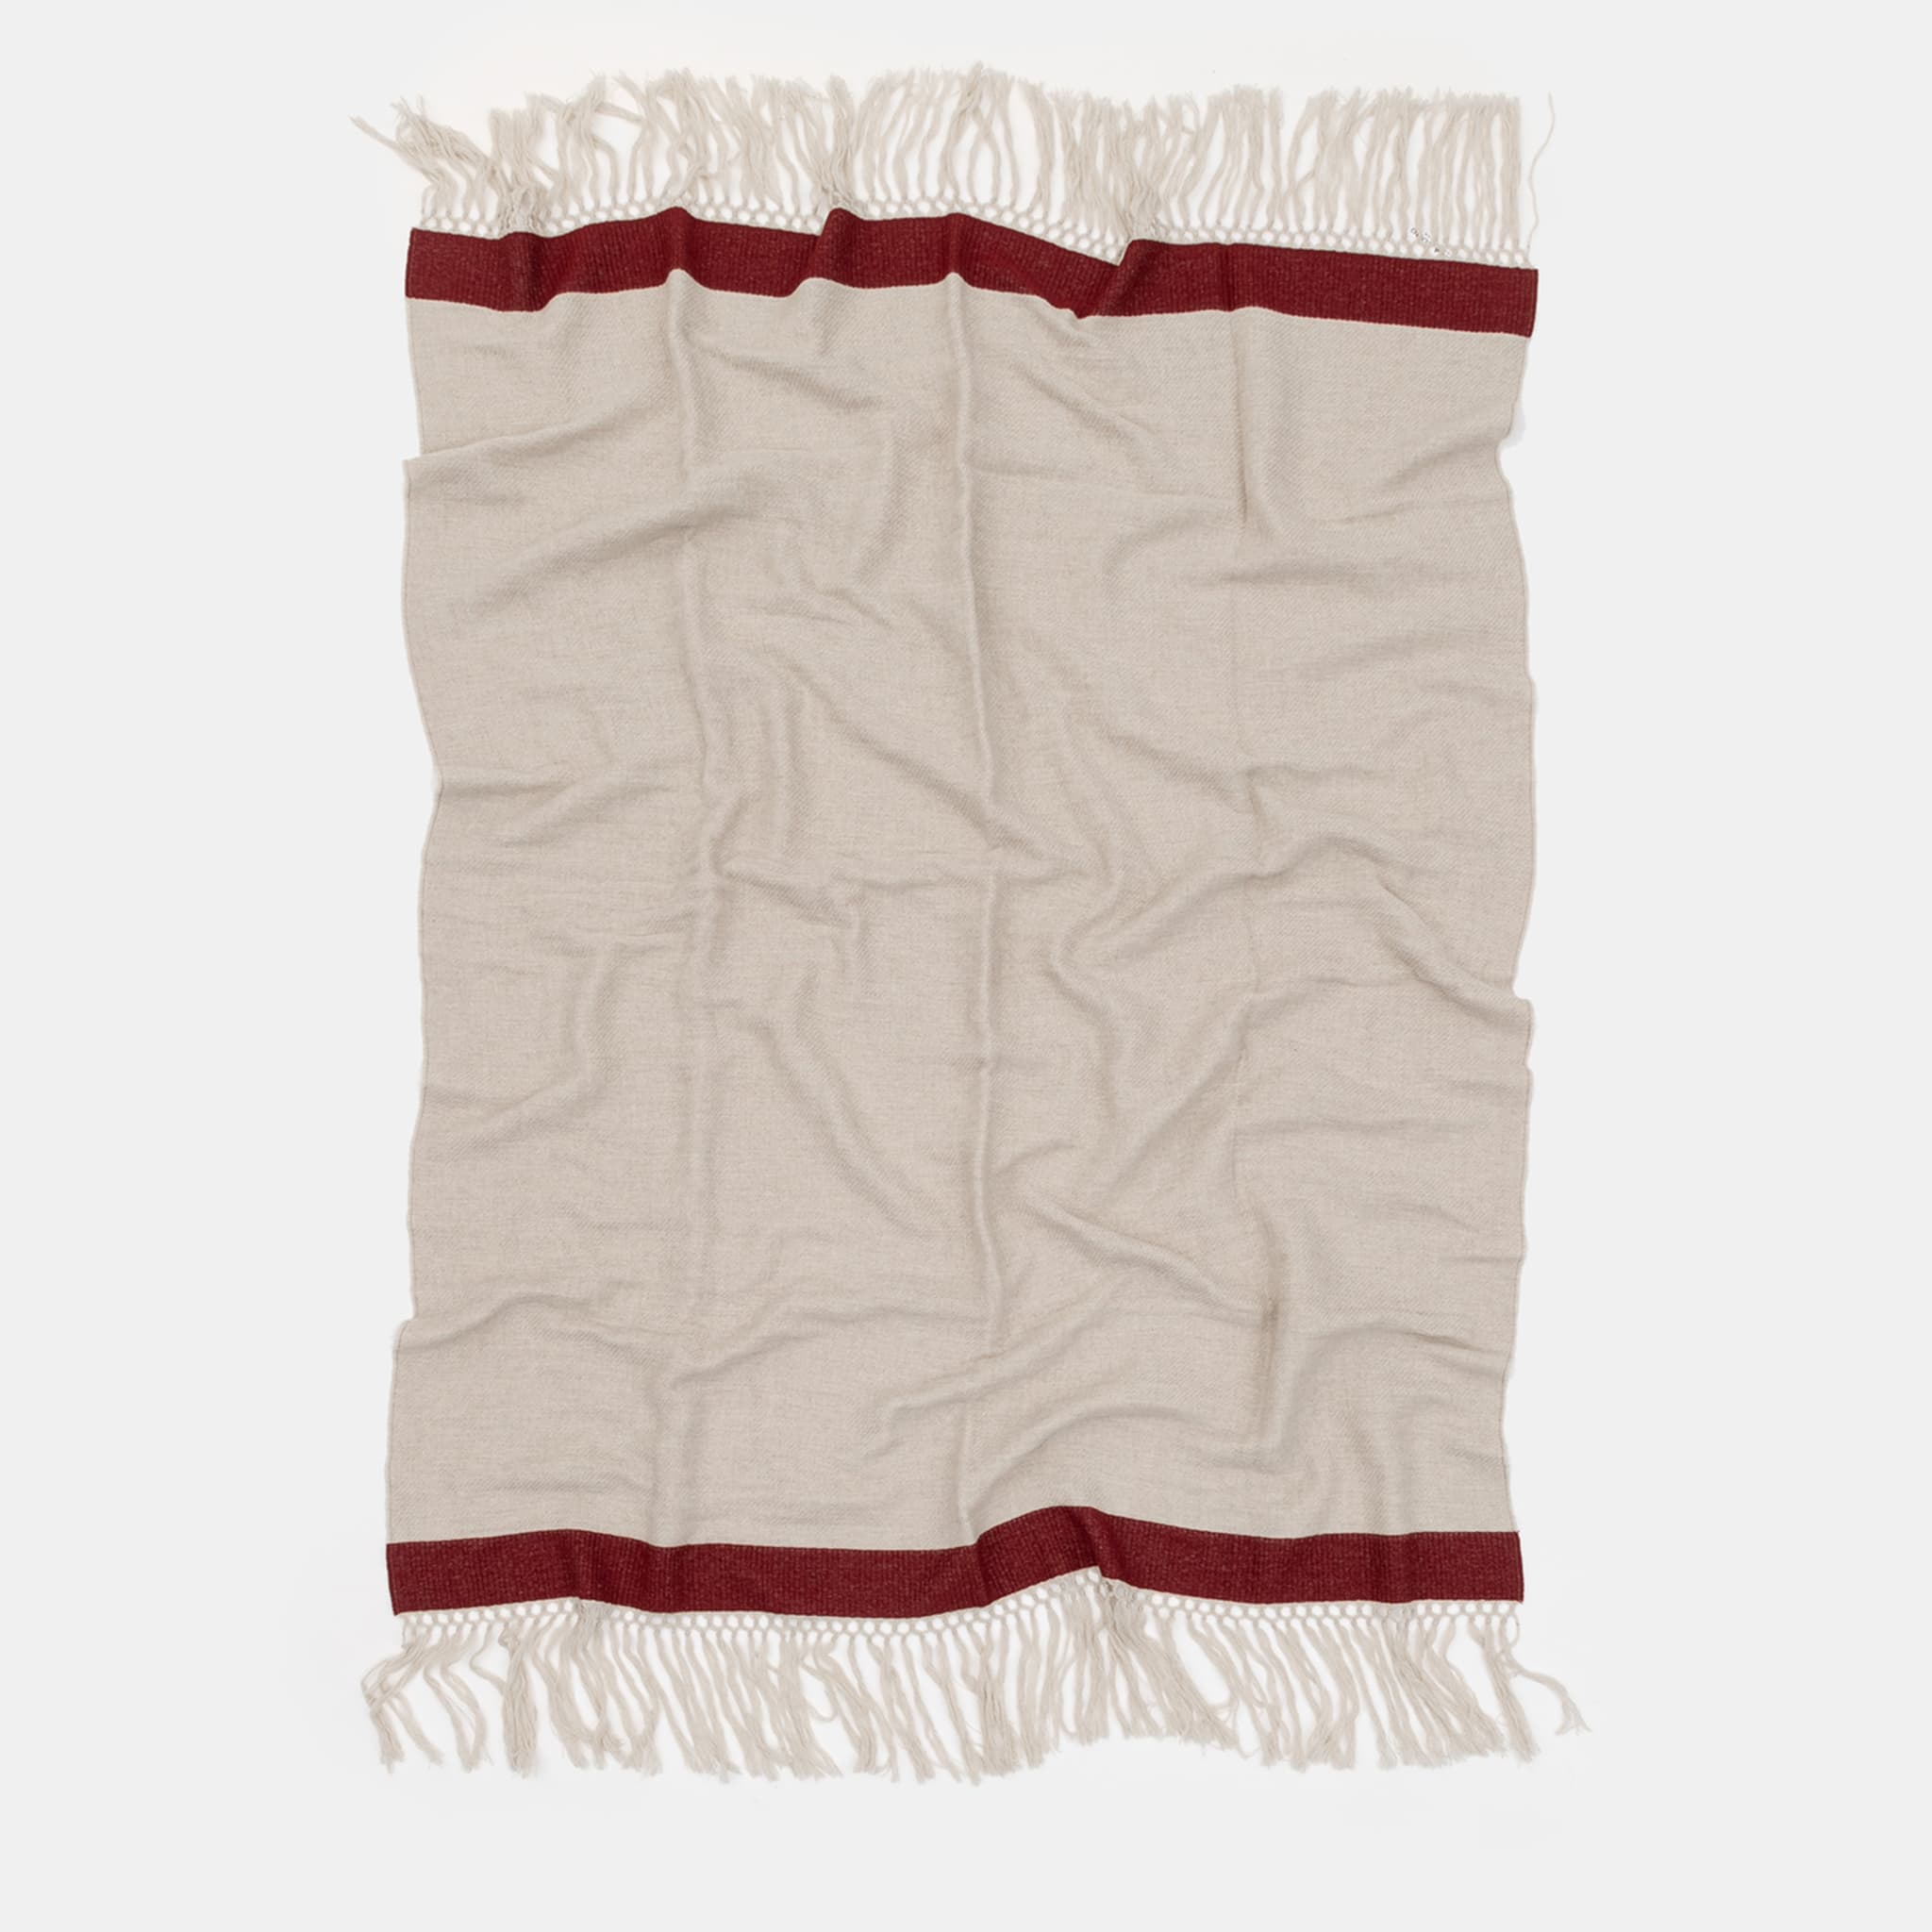 Fringed Red-Banded Blanket - Alternative view 1